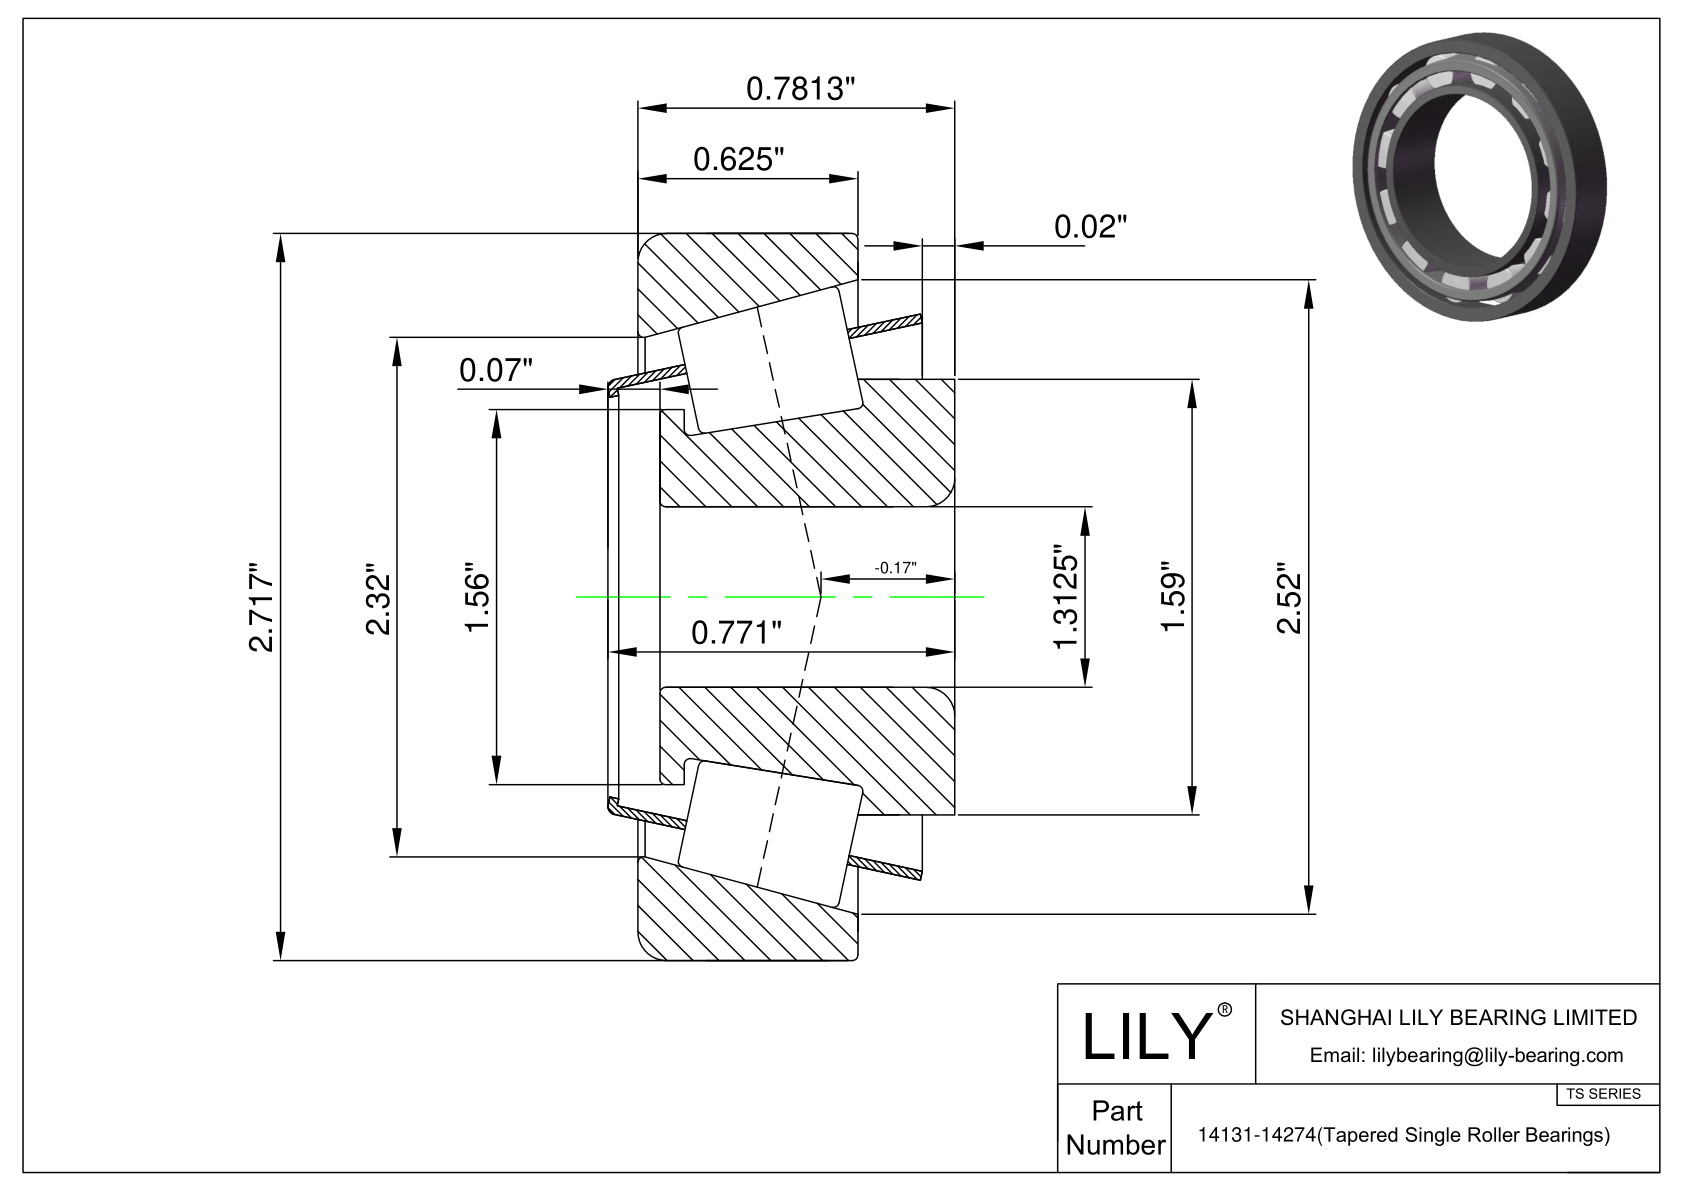 14131-14274 TS (Tapered Single Roller Bearings) (Imperial) cad drawing